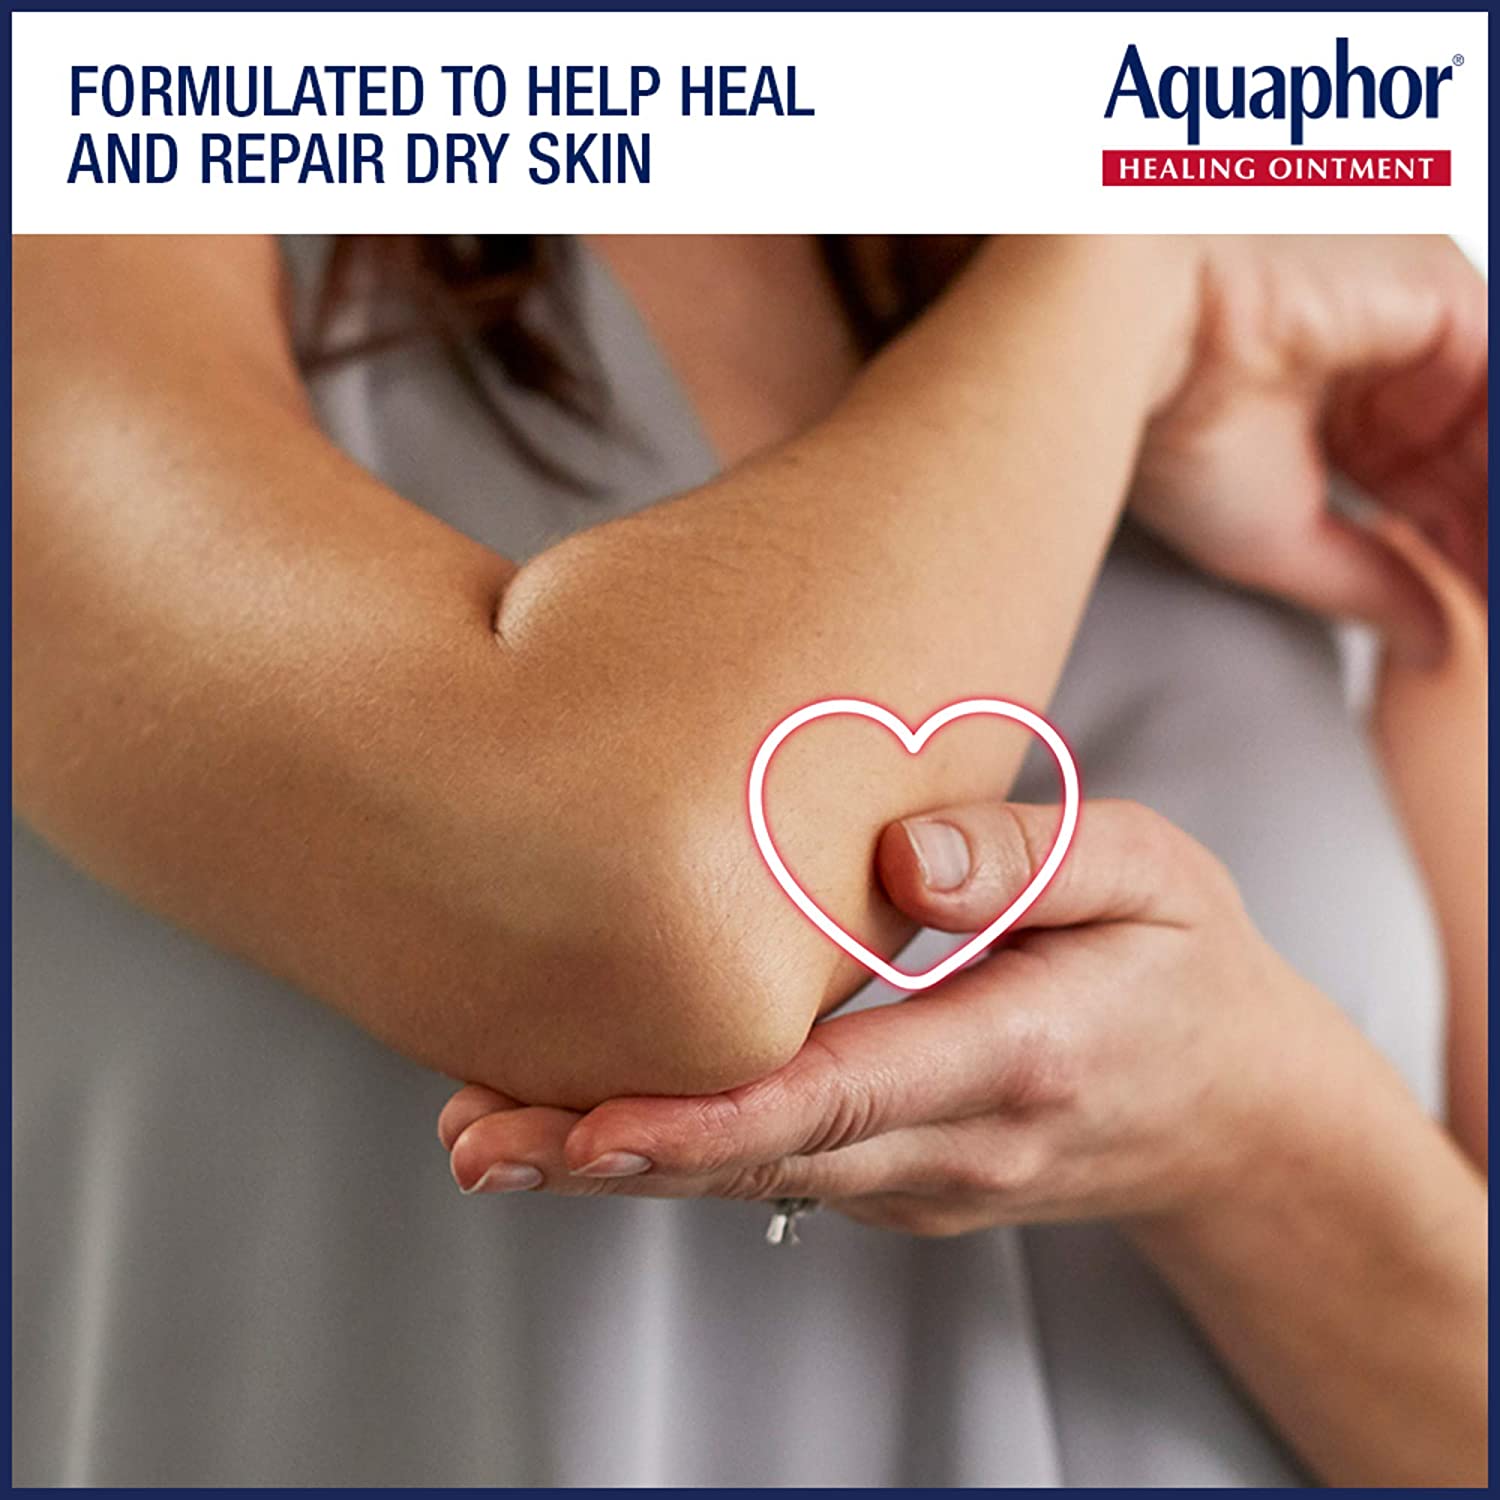 Aquaphor Healing Ointment - Moisturizing Skin Protectant for Dry Cracked Hands, Heels and Elbows, Use After Hand Washing - 14 oz. Jar - image 2 of 4